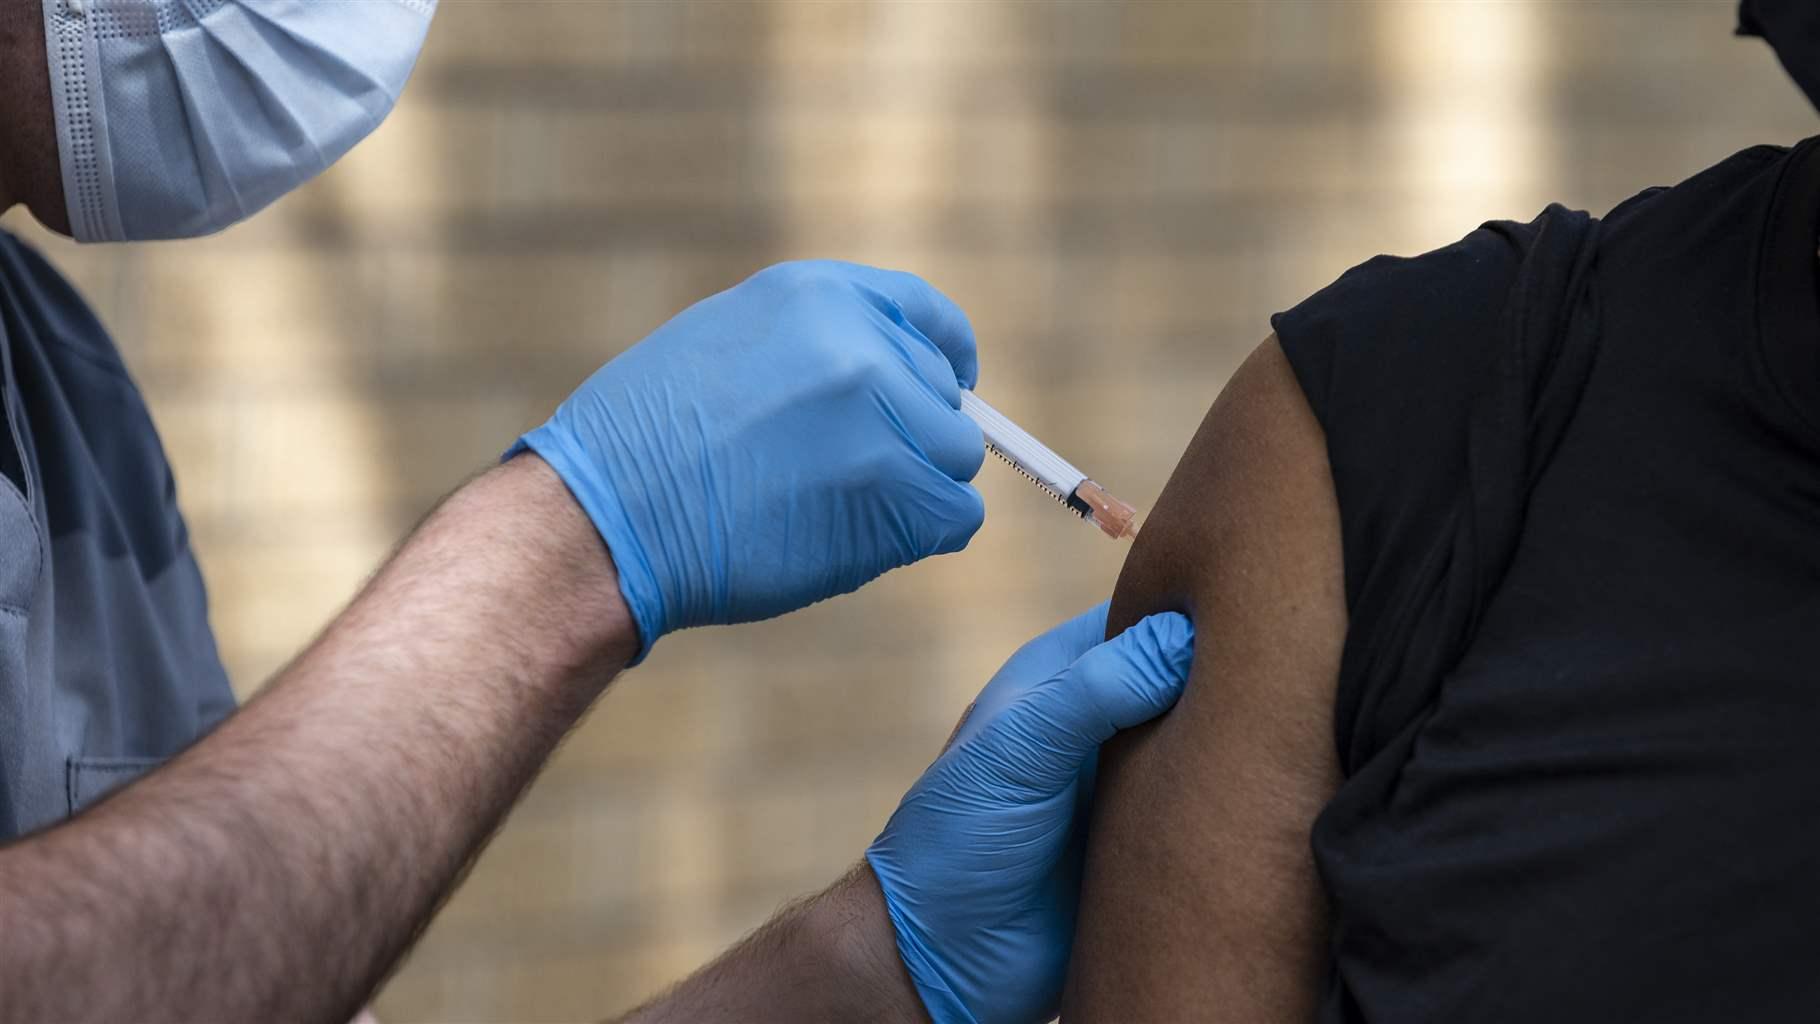 National Guard Specialist Noah Vulpi, left, administers the Johnson & Johnson COVID-19 vaccine to Ira Young Jr during a vaccination clinic held by the National Guard Thursday, May 27, 2021 in Odessa, Texas. 